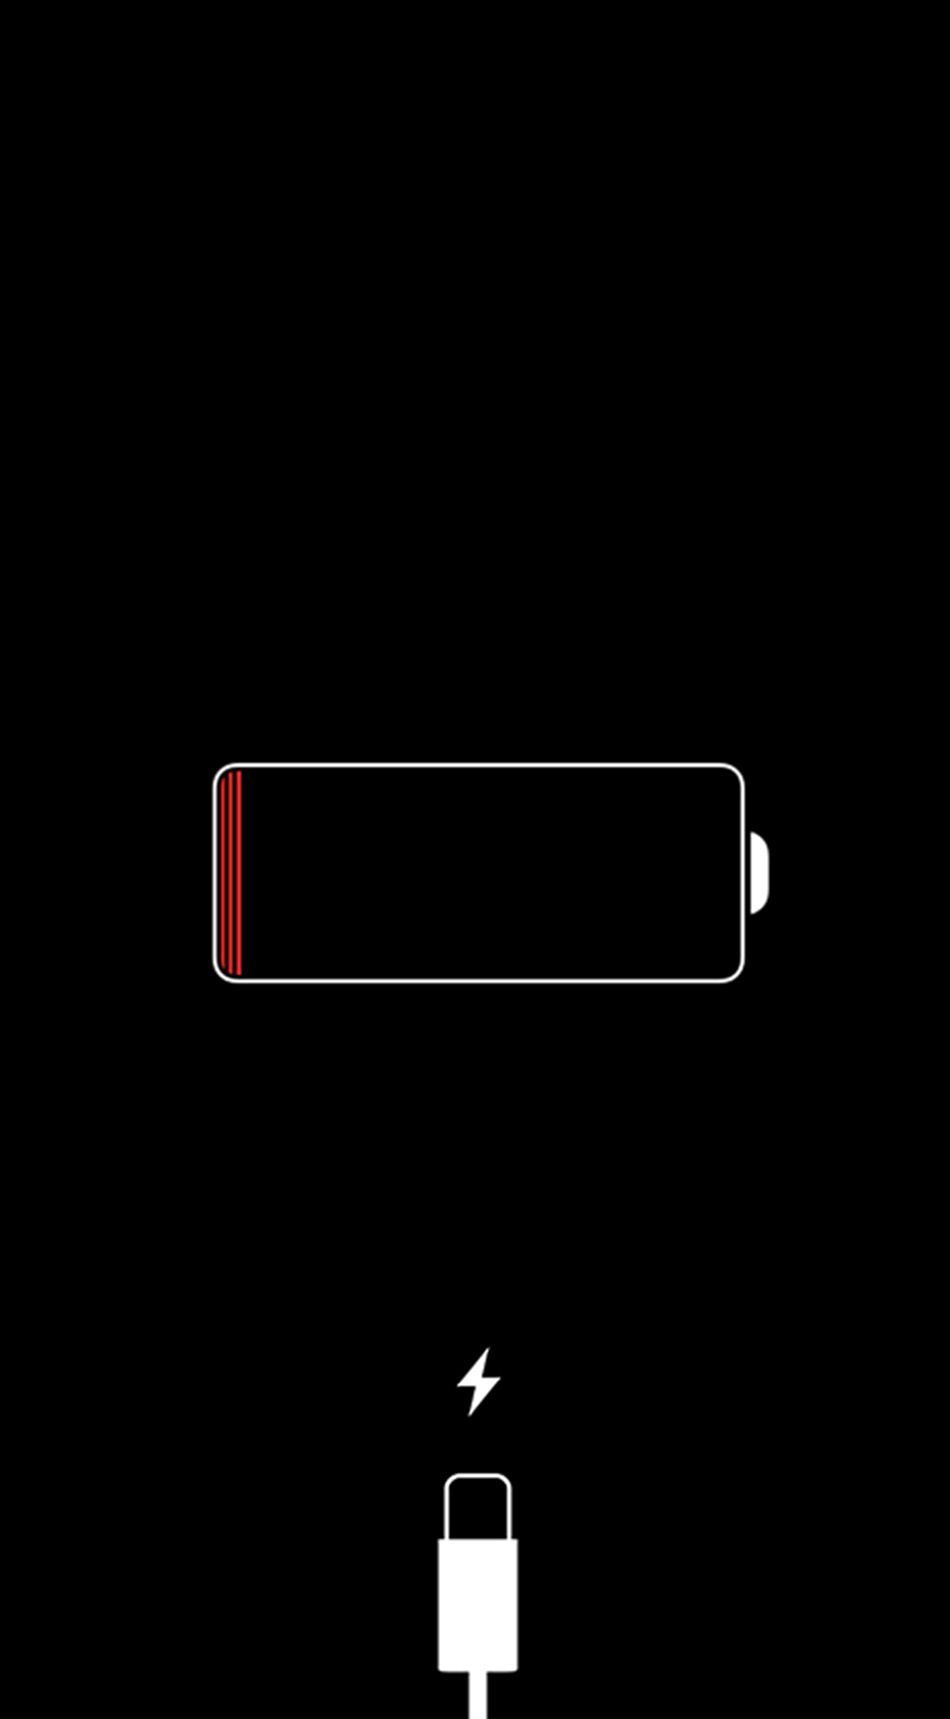 What You Need to Do If You See a Red iPhone Battery Icon. Black wallpaper iphone, Funny iphone wallpaper, Bape wallpaper